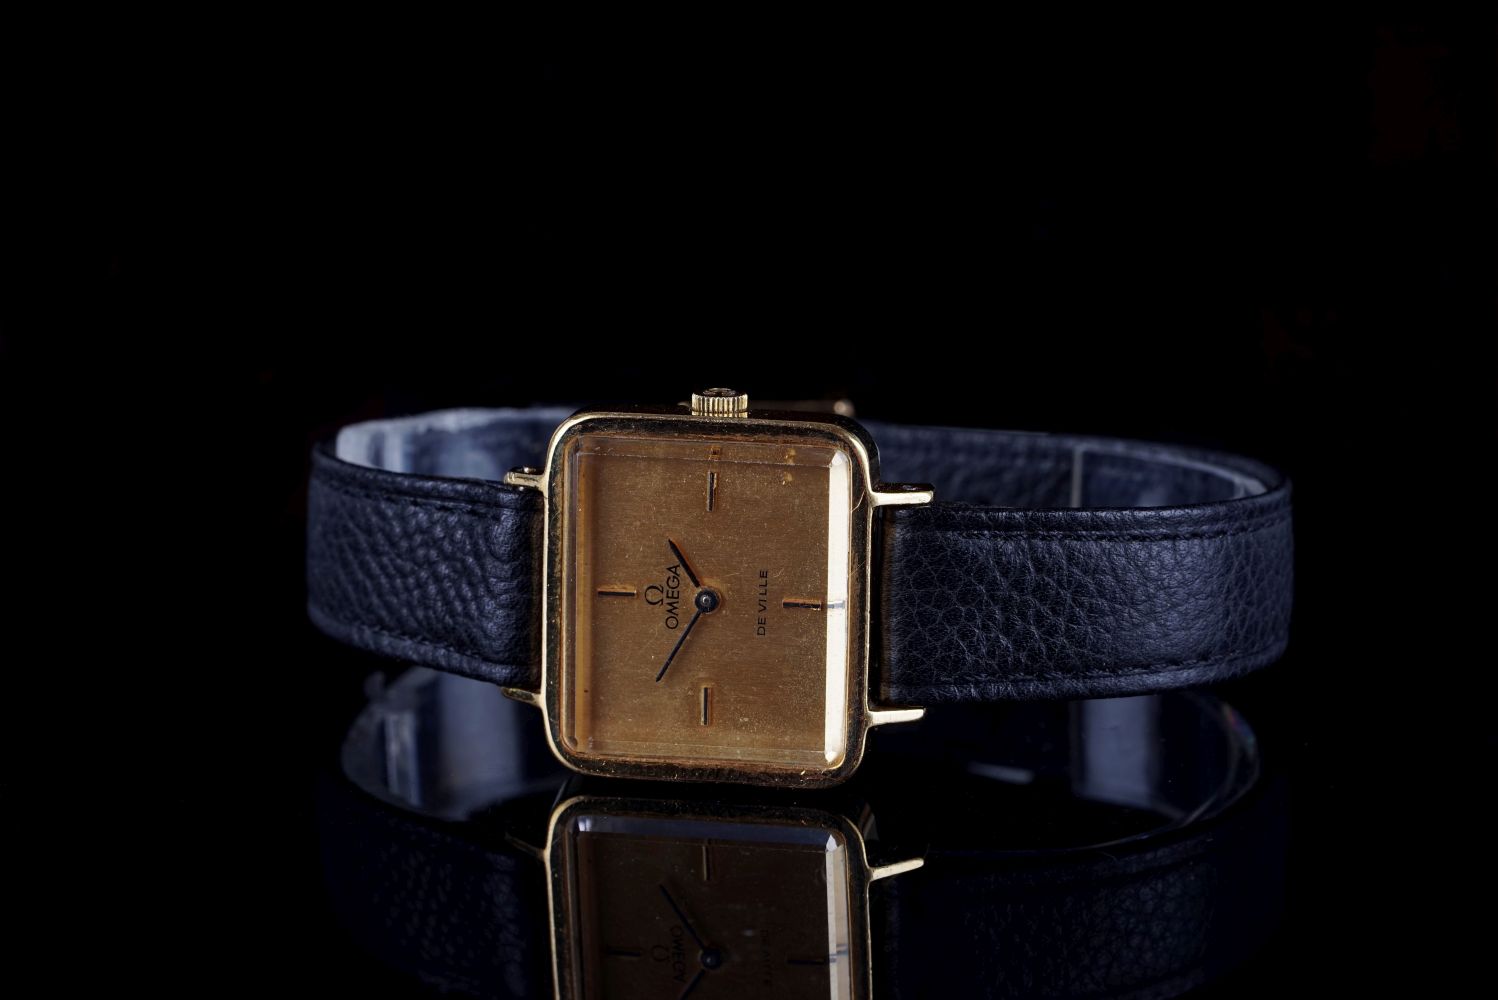 LADIES OMEGA DE VILLE WRISTWATCH REF. ST 511.0375, rectangular brushed gold dial with stick hour